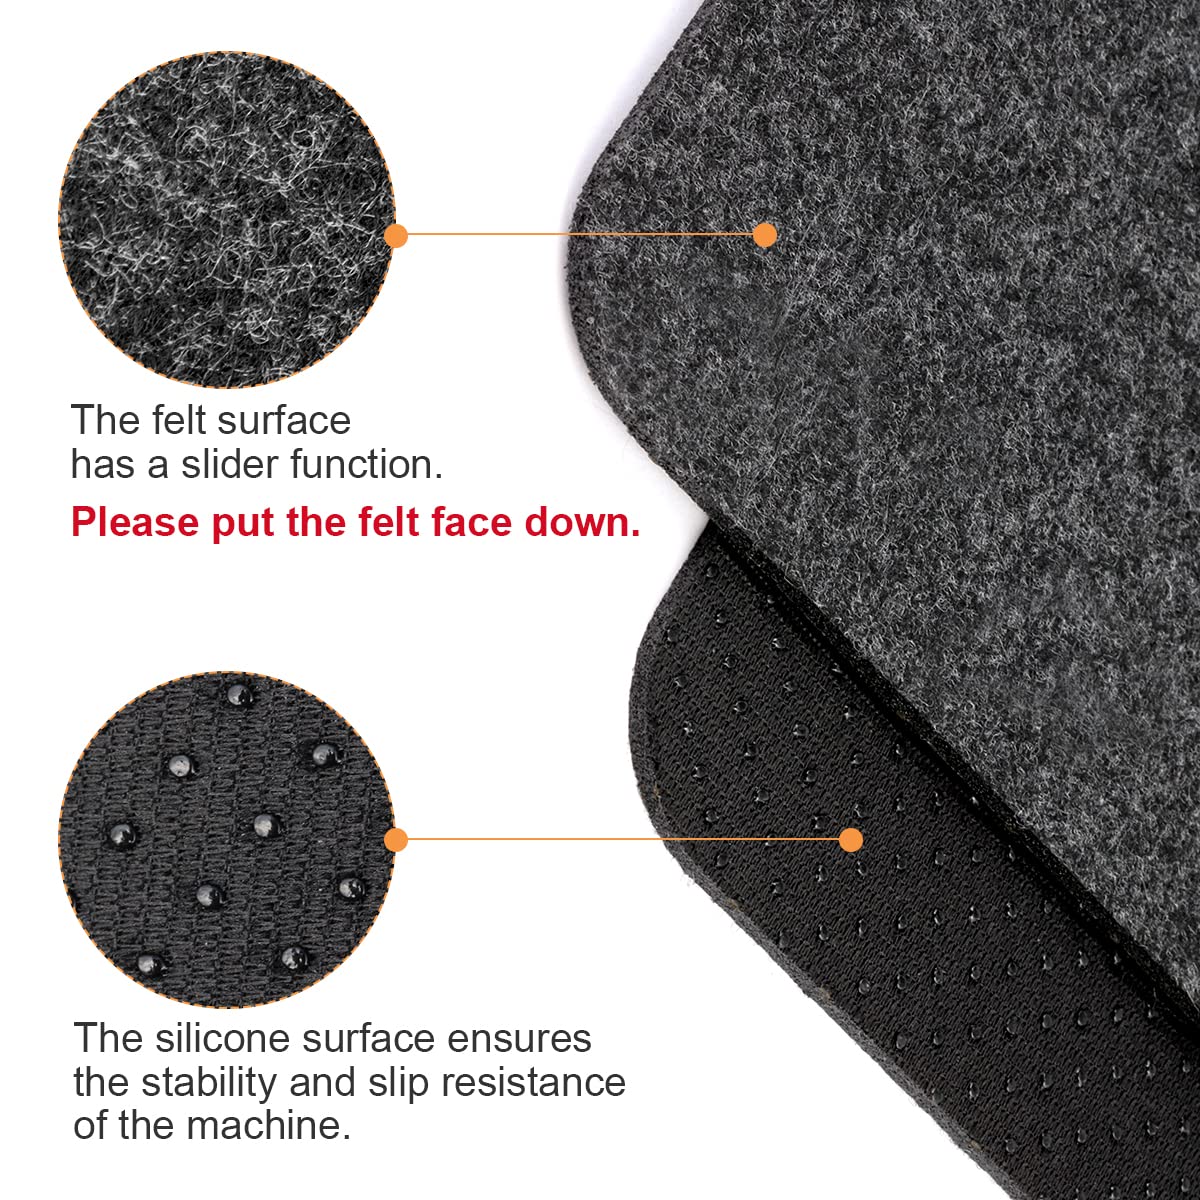 the felt surface has a slider function. the silicone surface ensures the stability and slip resistance of the machine